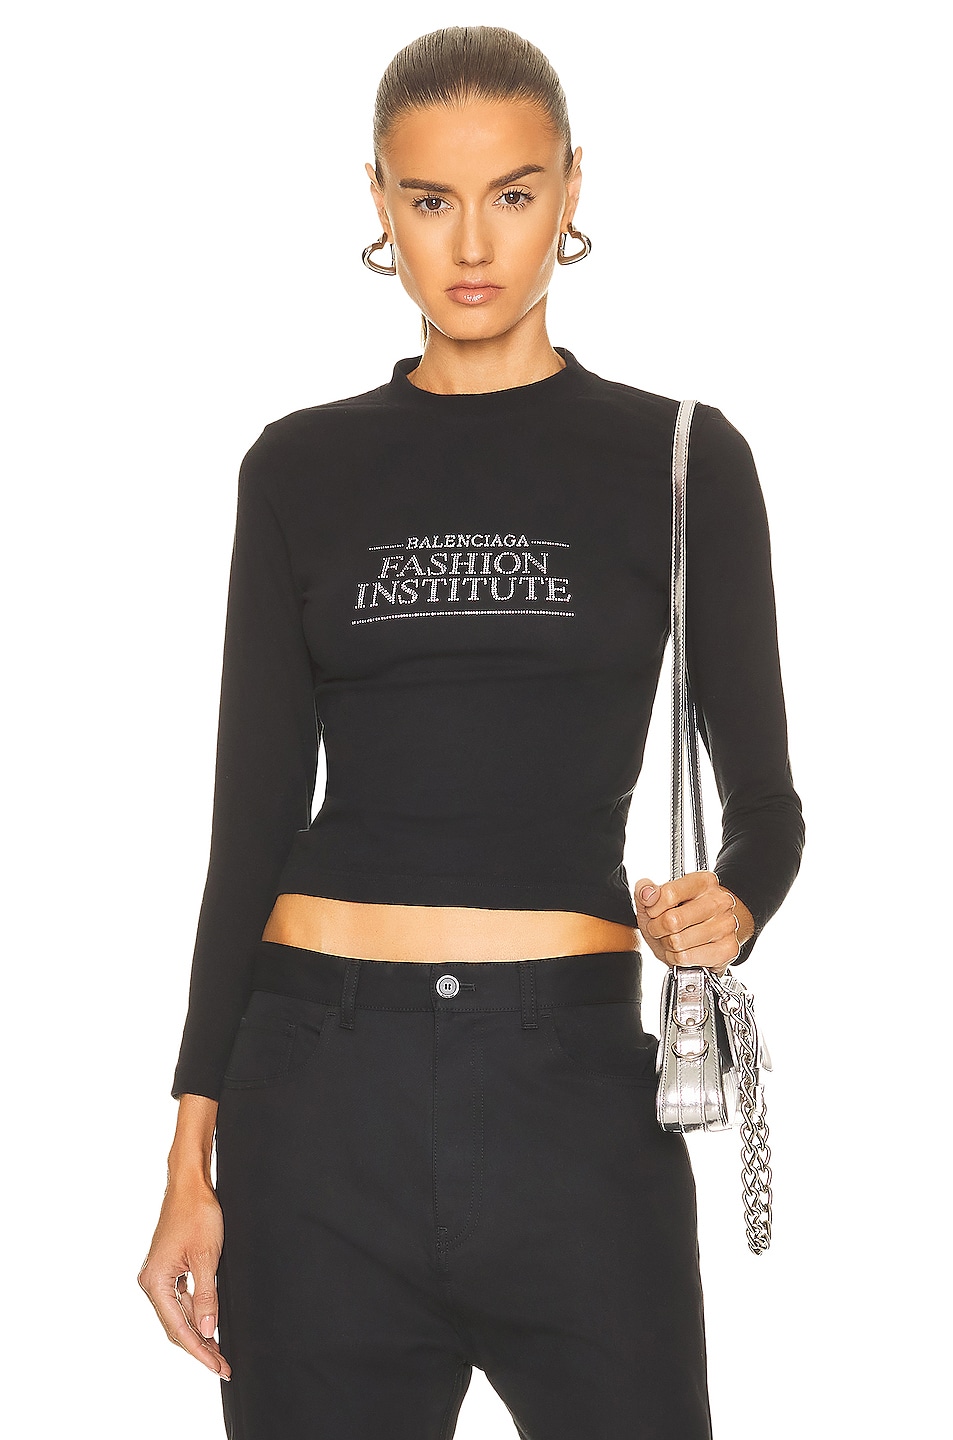 Image 1 of Balenciaga Fashion Institute Fitted Long Sleeve T-Shirt in Black & Silver Strass